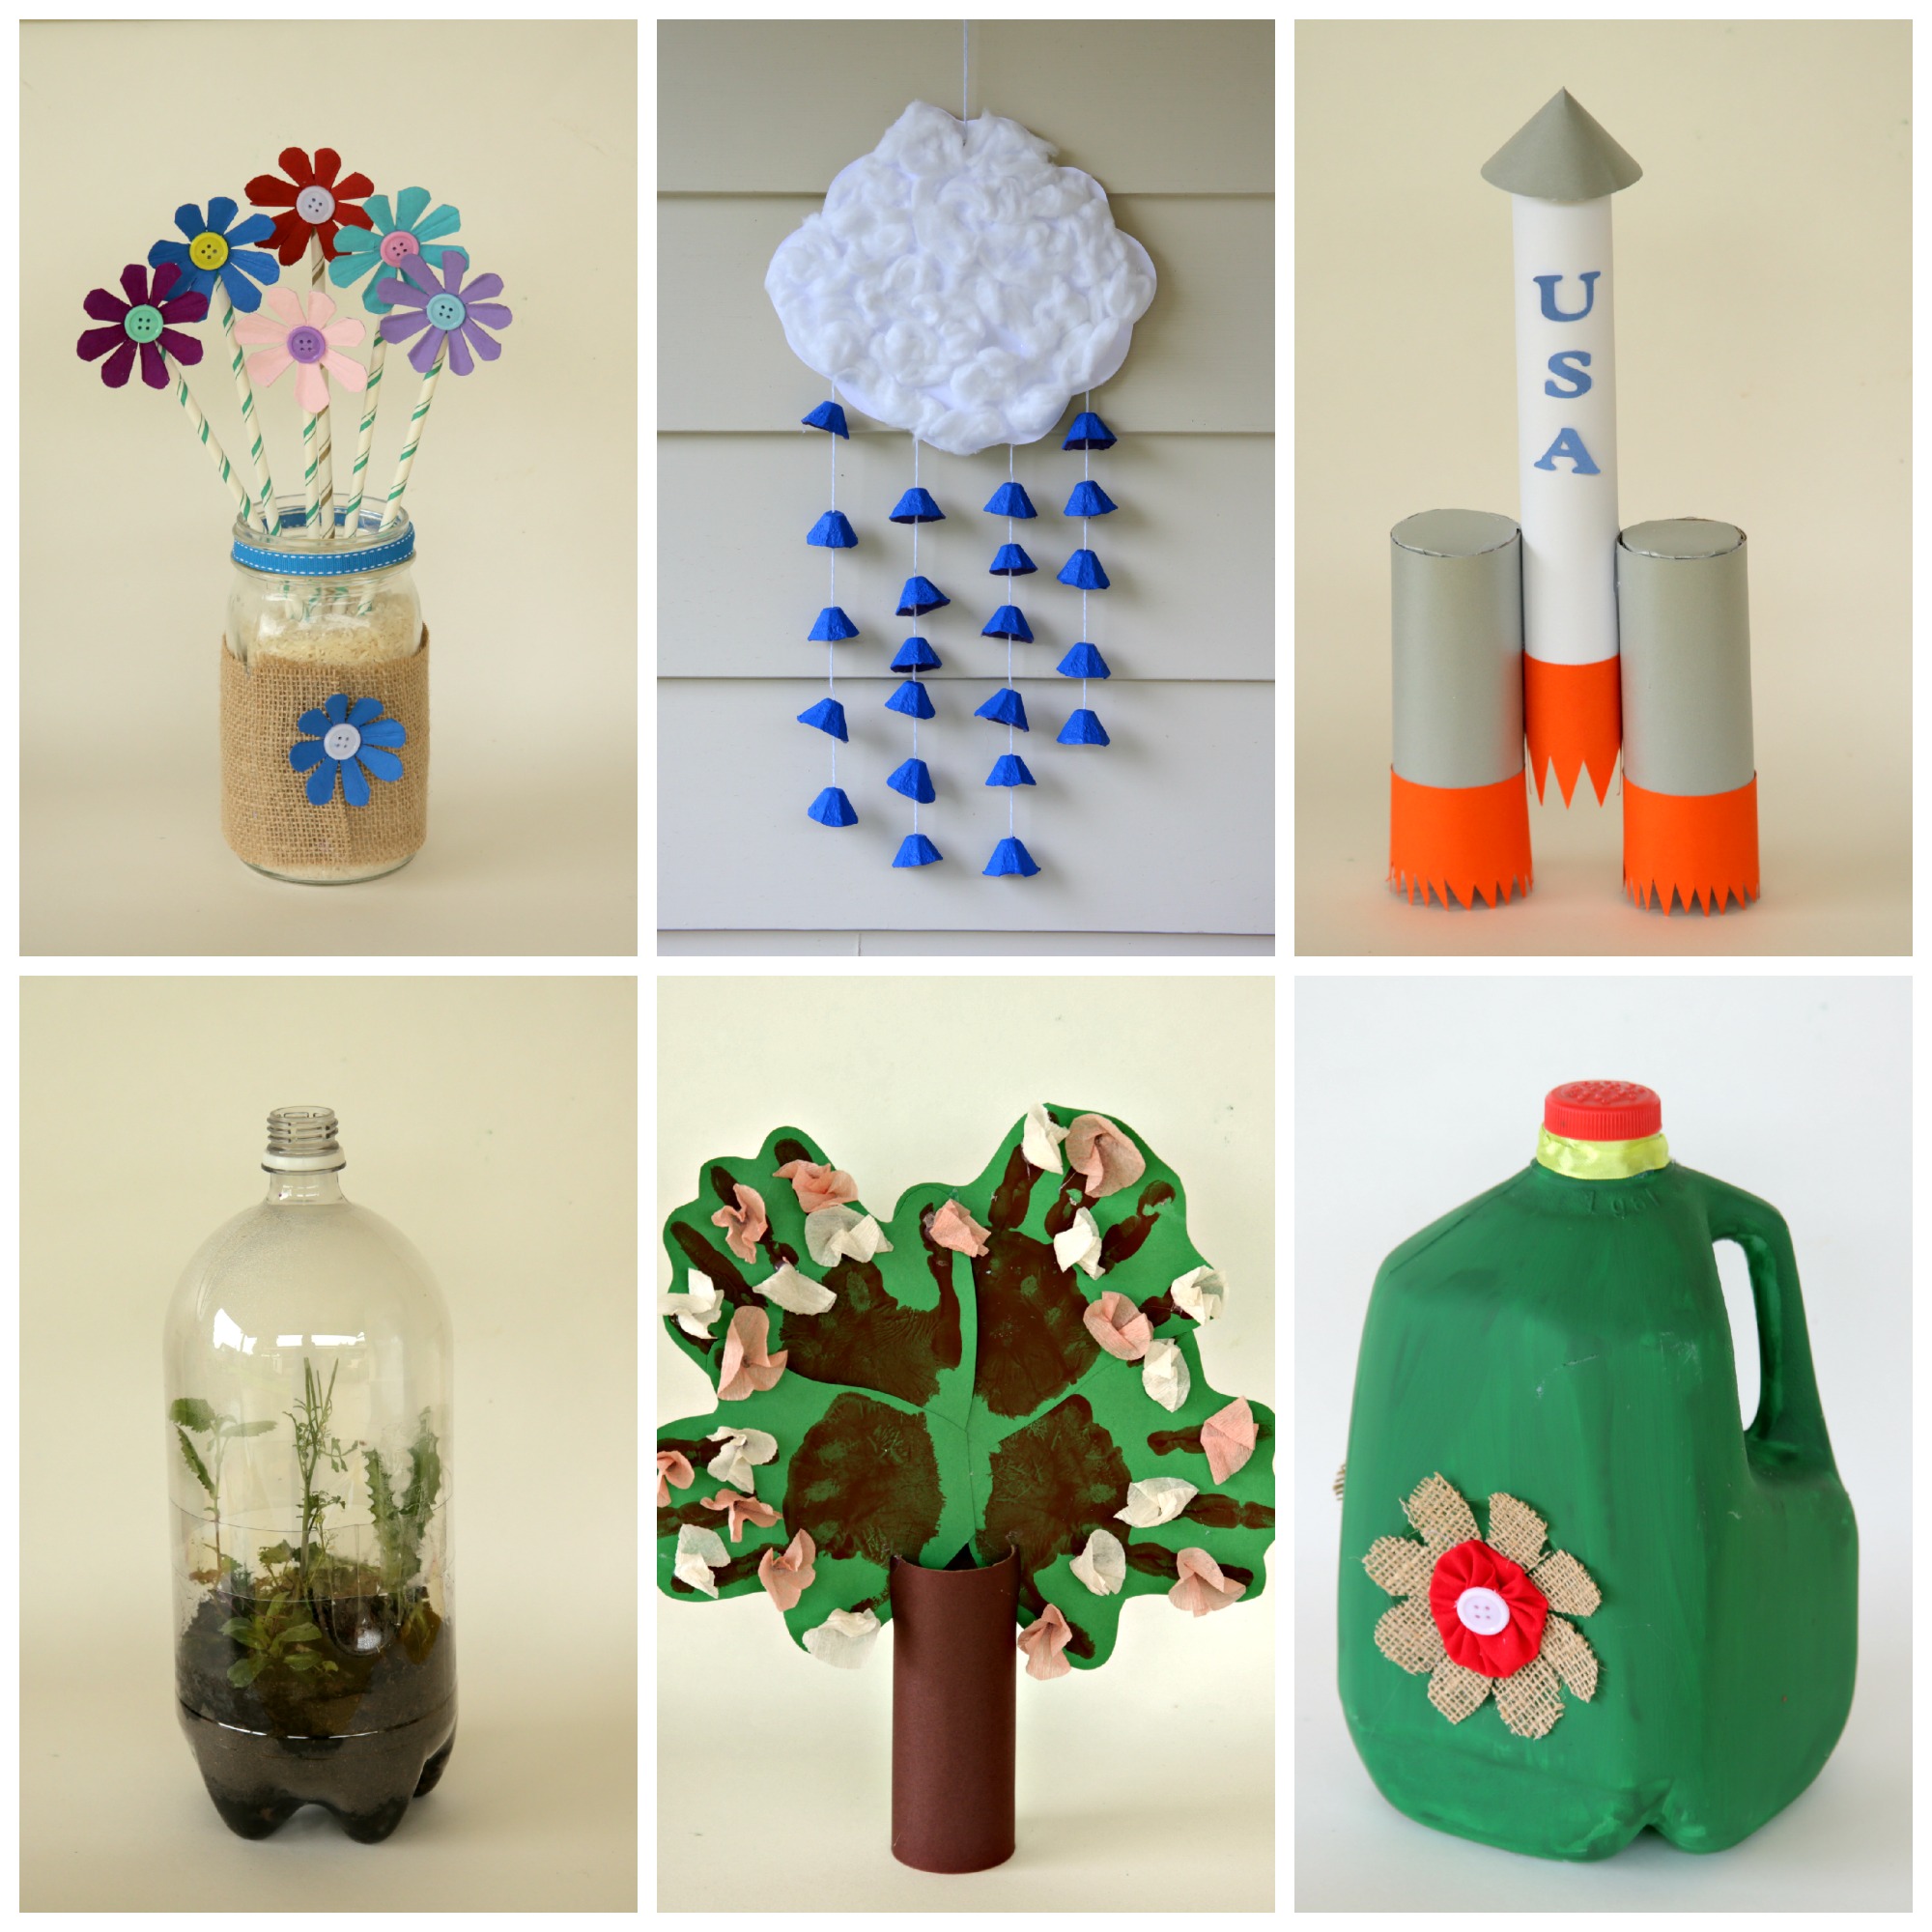 Repurposed for Play: 3 Craft Ideas for Kids